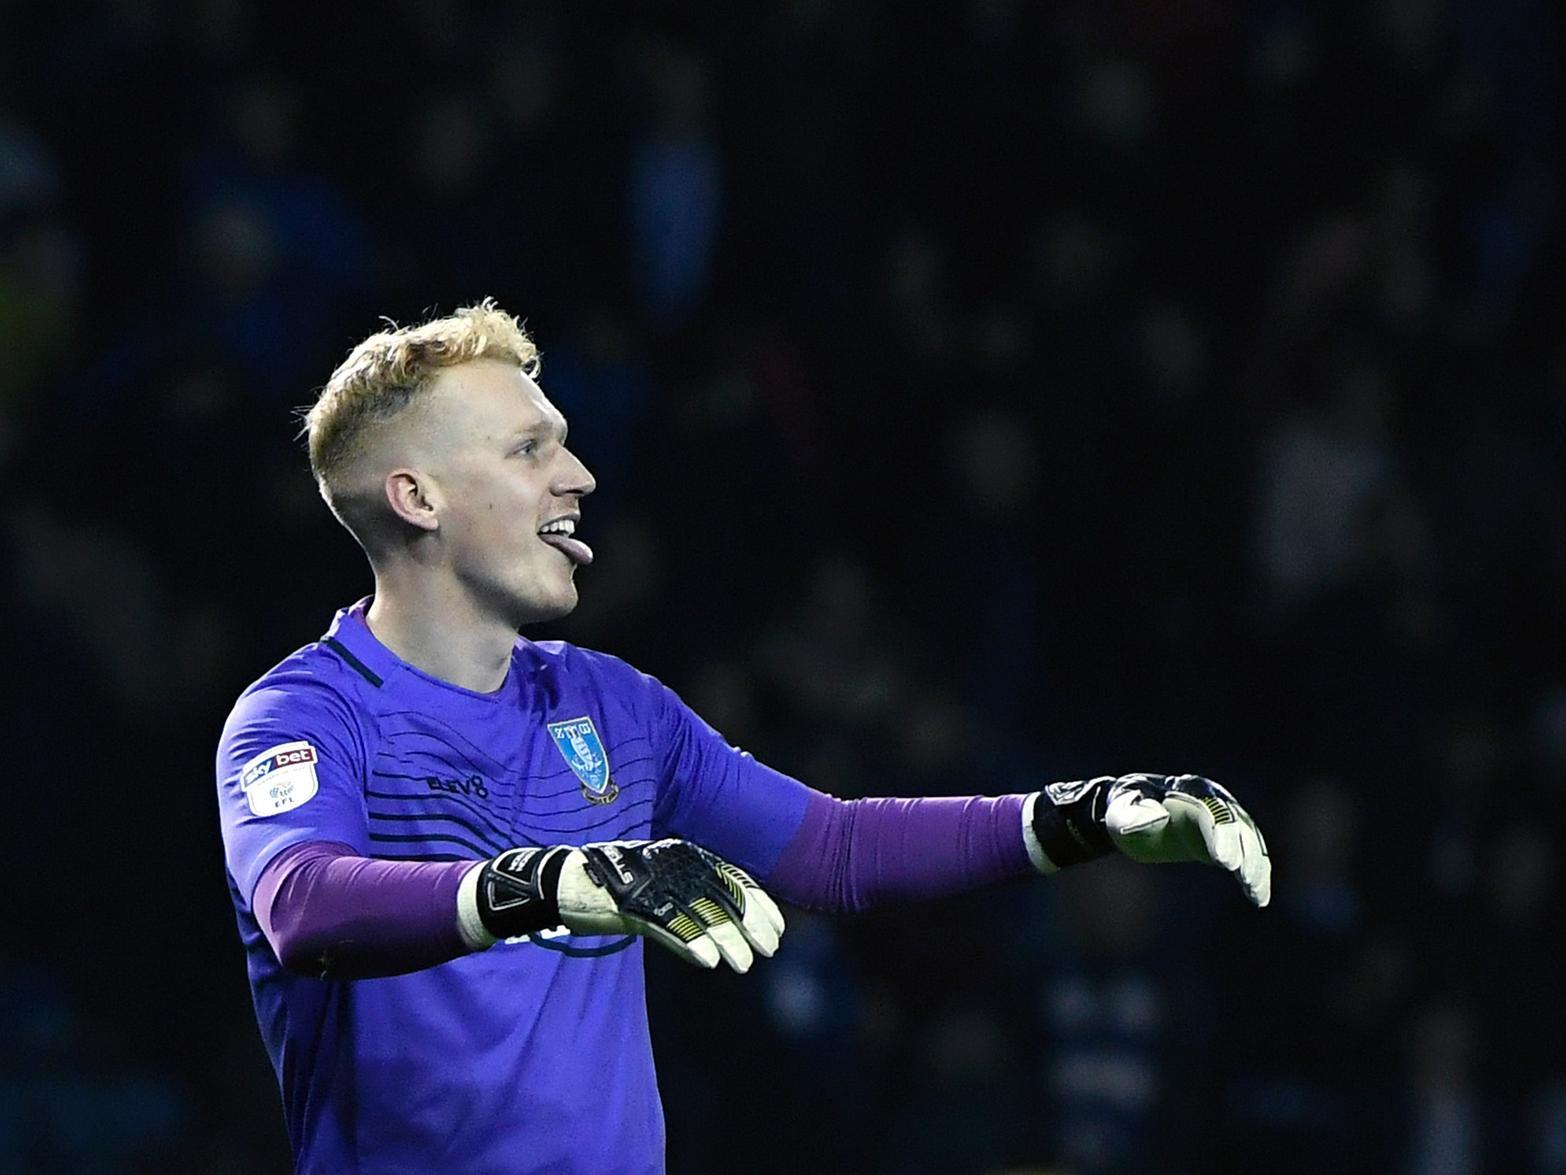 Sheffield Wednesday Cameron Dawson has insisted that he's looking to remain at the club amid interest from the likes of Rangers and Preston, and is targetingplaying top tier football with the Owls in the future. (Sheffield Star)